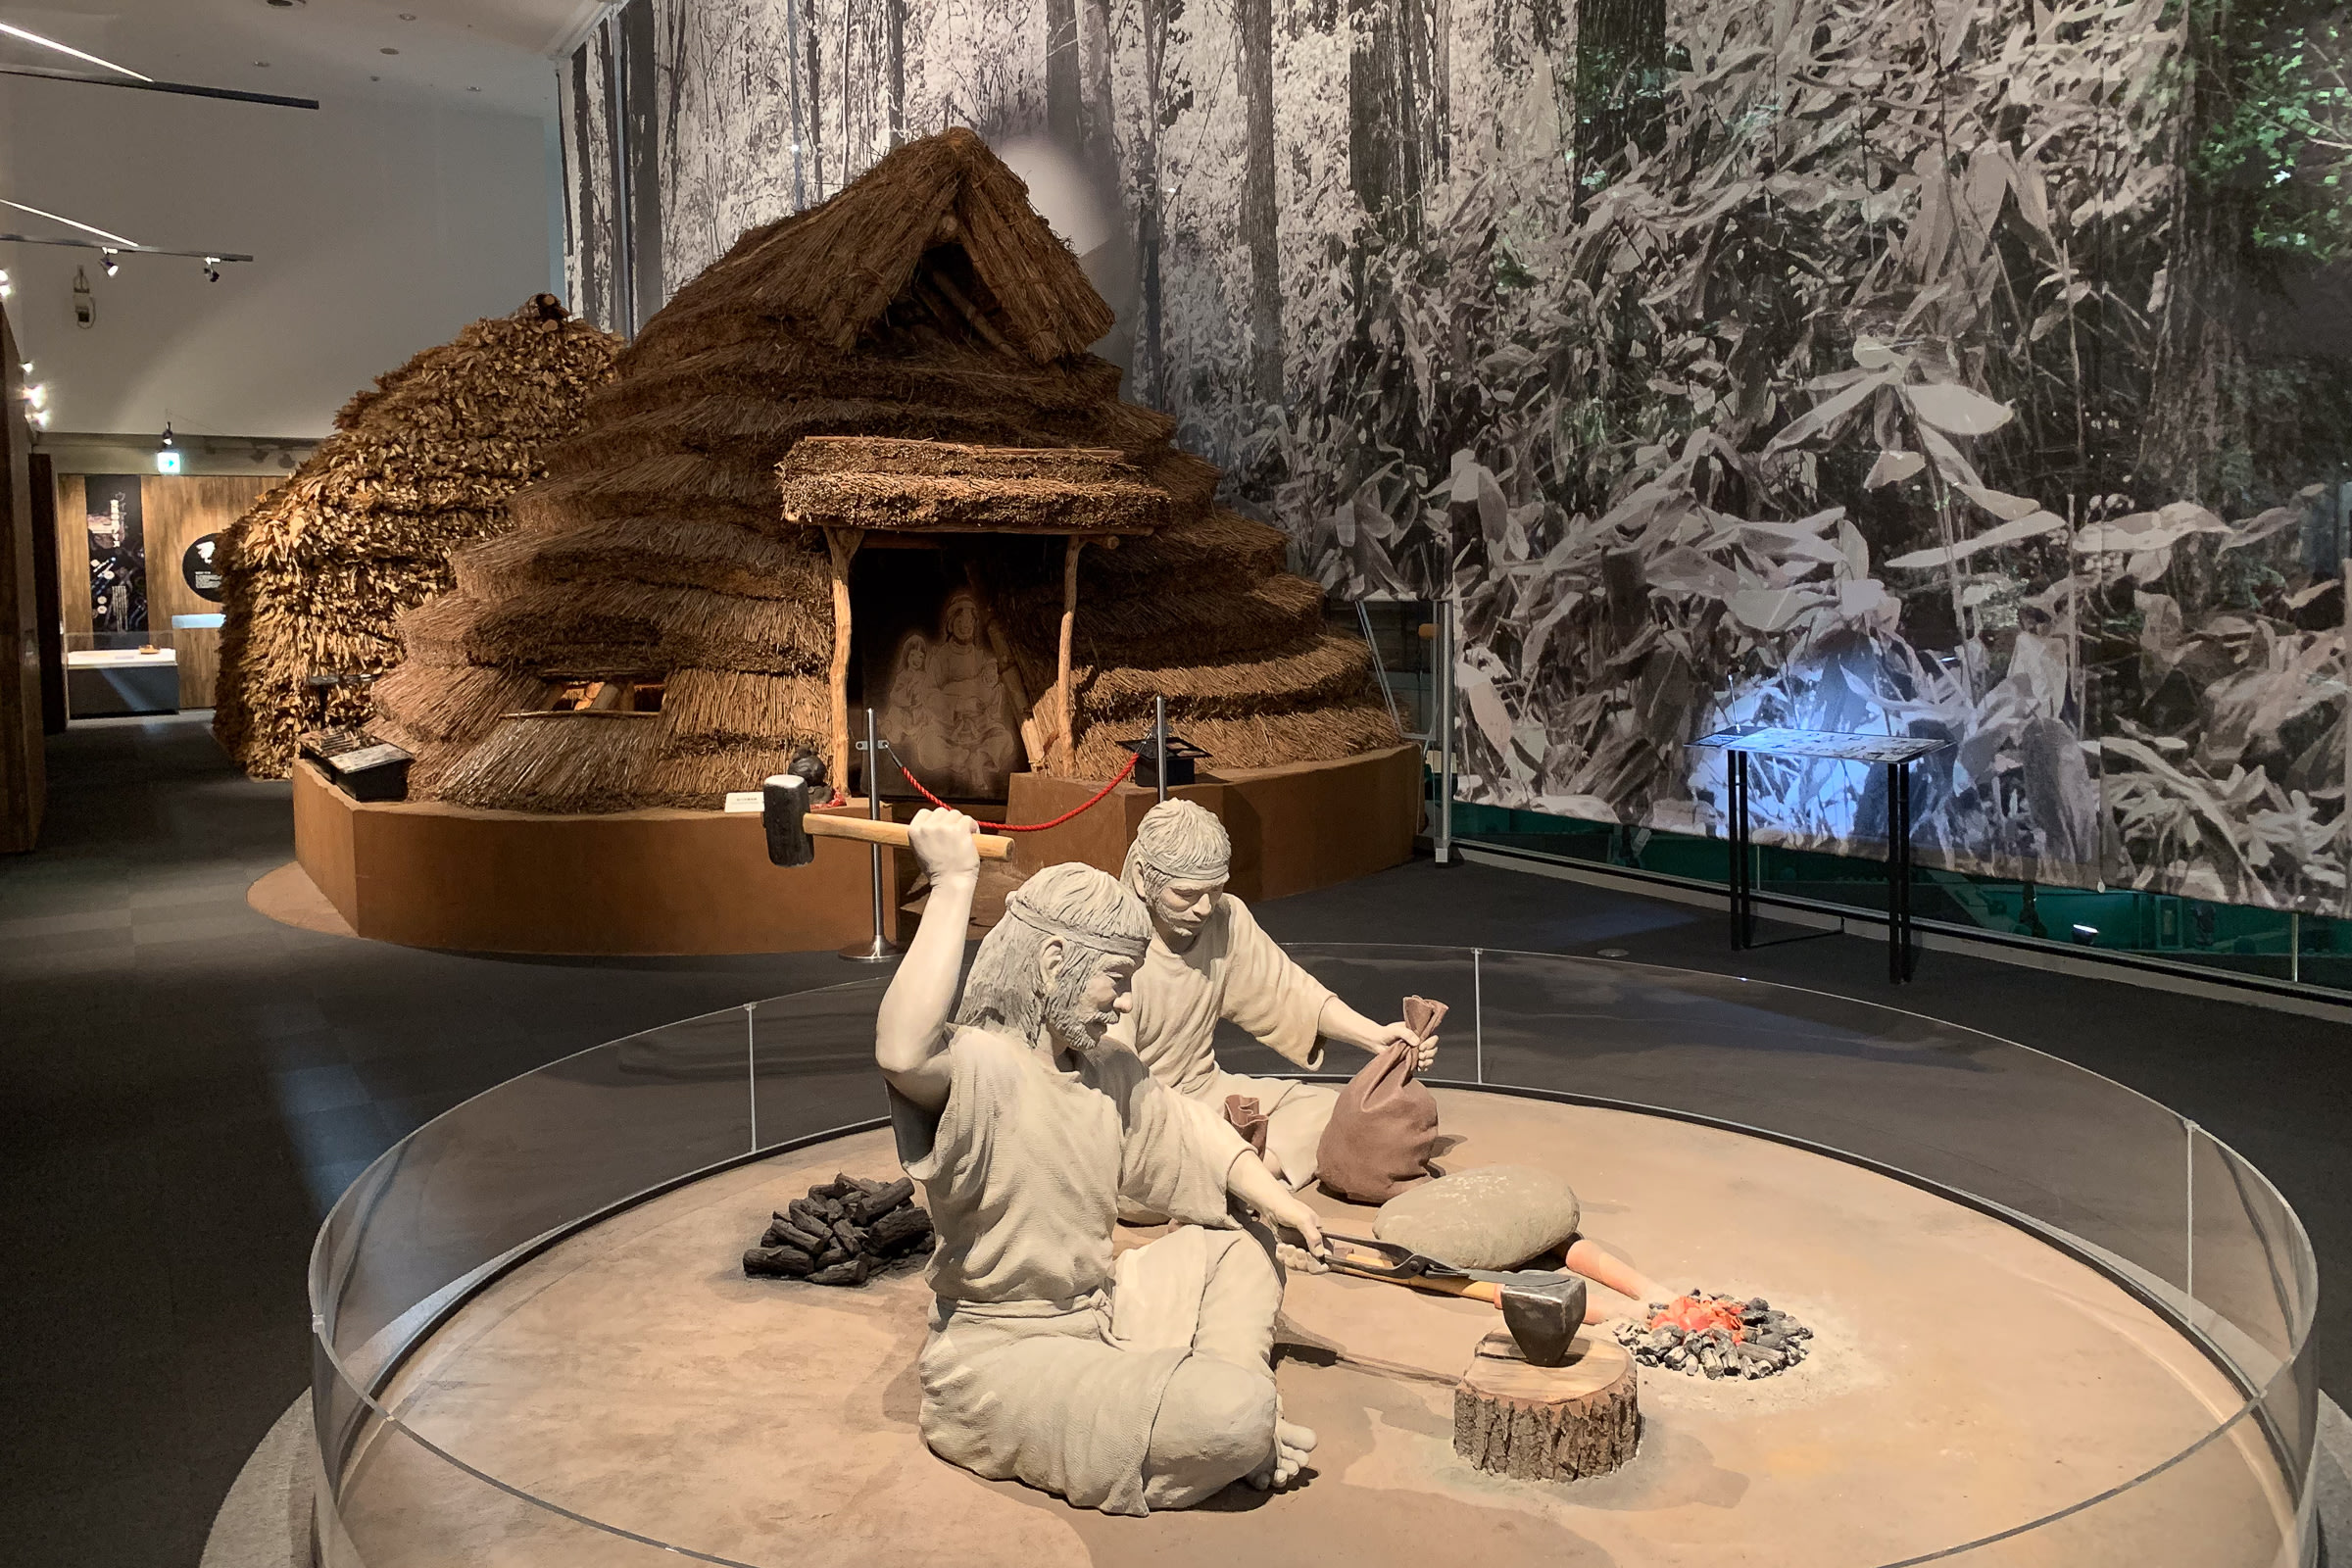 An Ainu display inside the Asahikawa City Museum. There are replica "cise", Ainu dwellings, behind two statues capturing Ainu people at work.